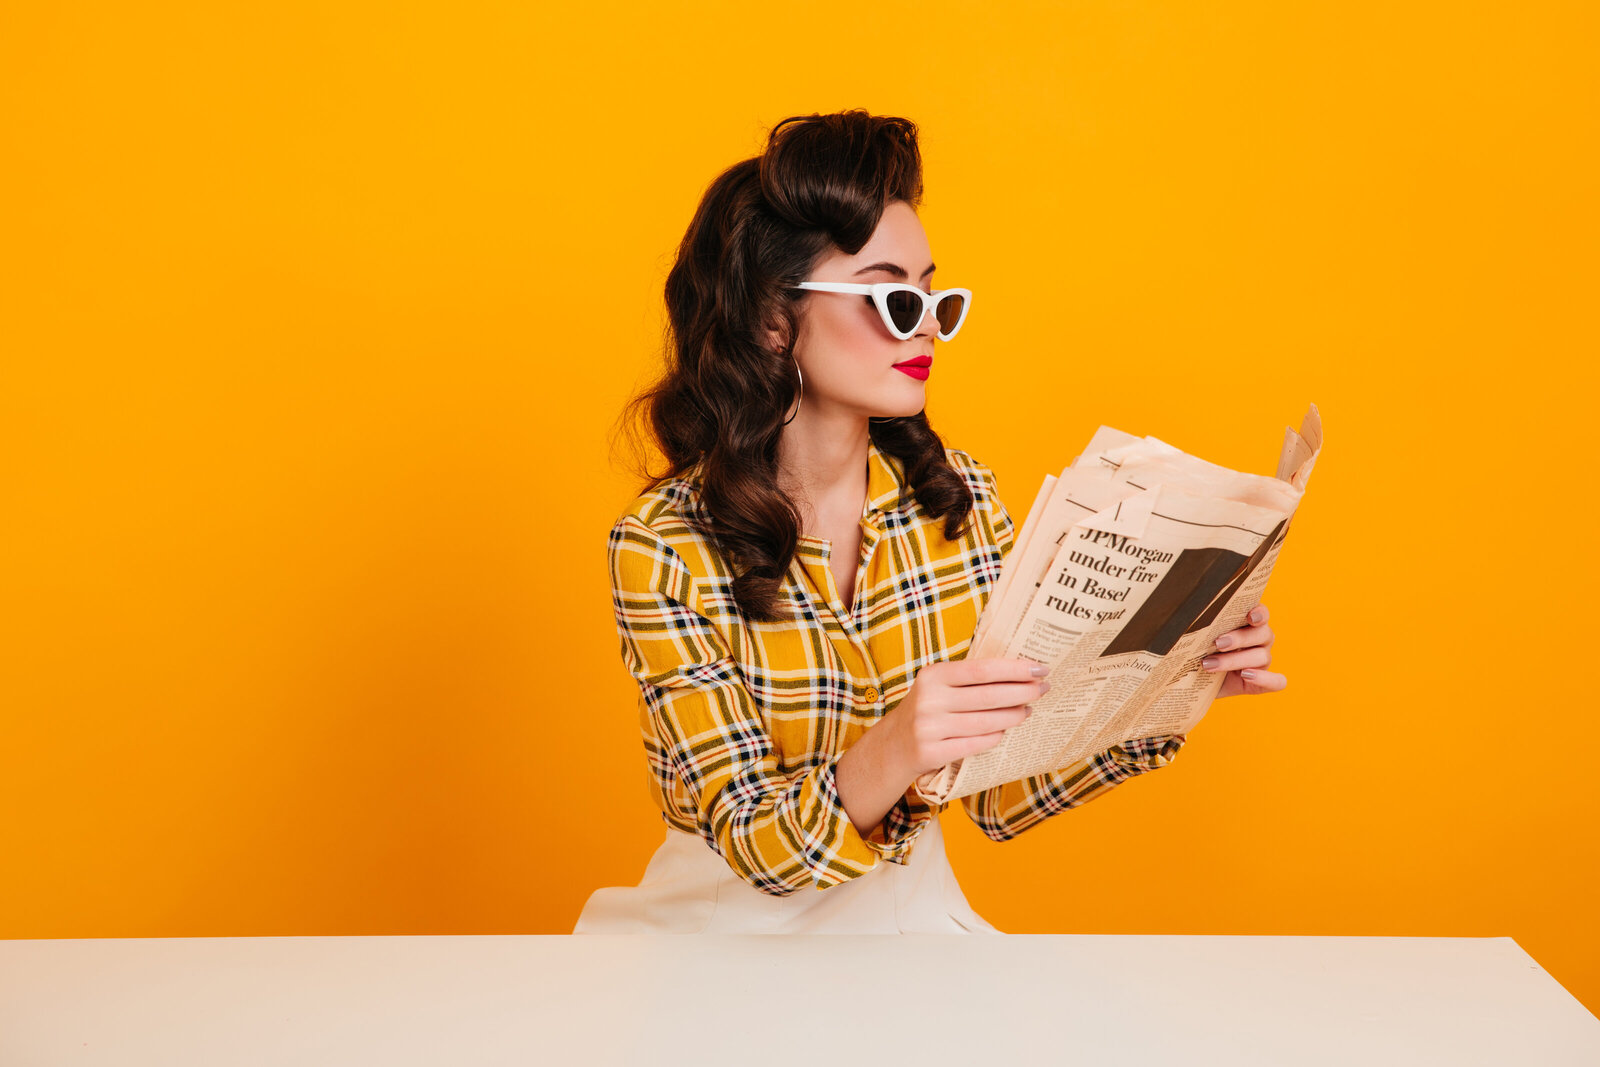 elegant-young-woman-reading-newspaper-studio-shot-concentrated-pinup-girl-posing-yellow-background